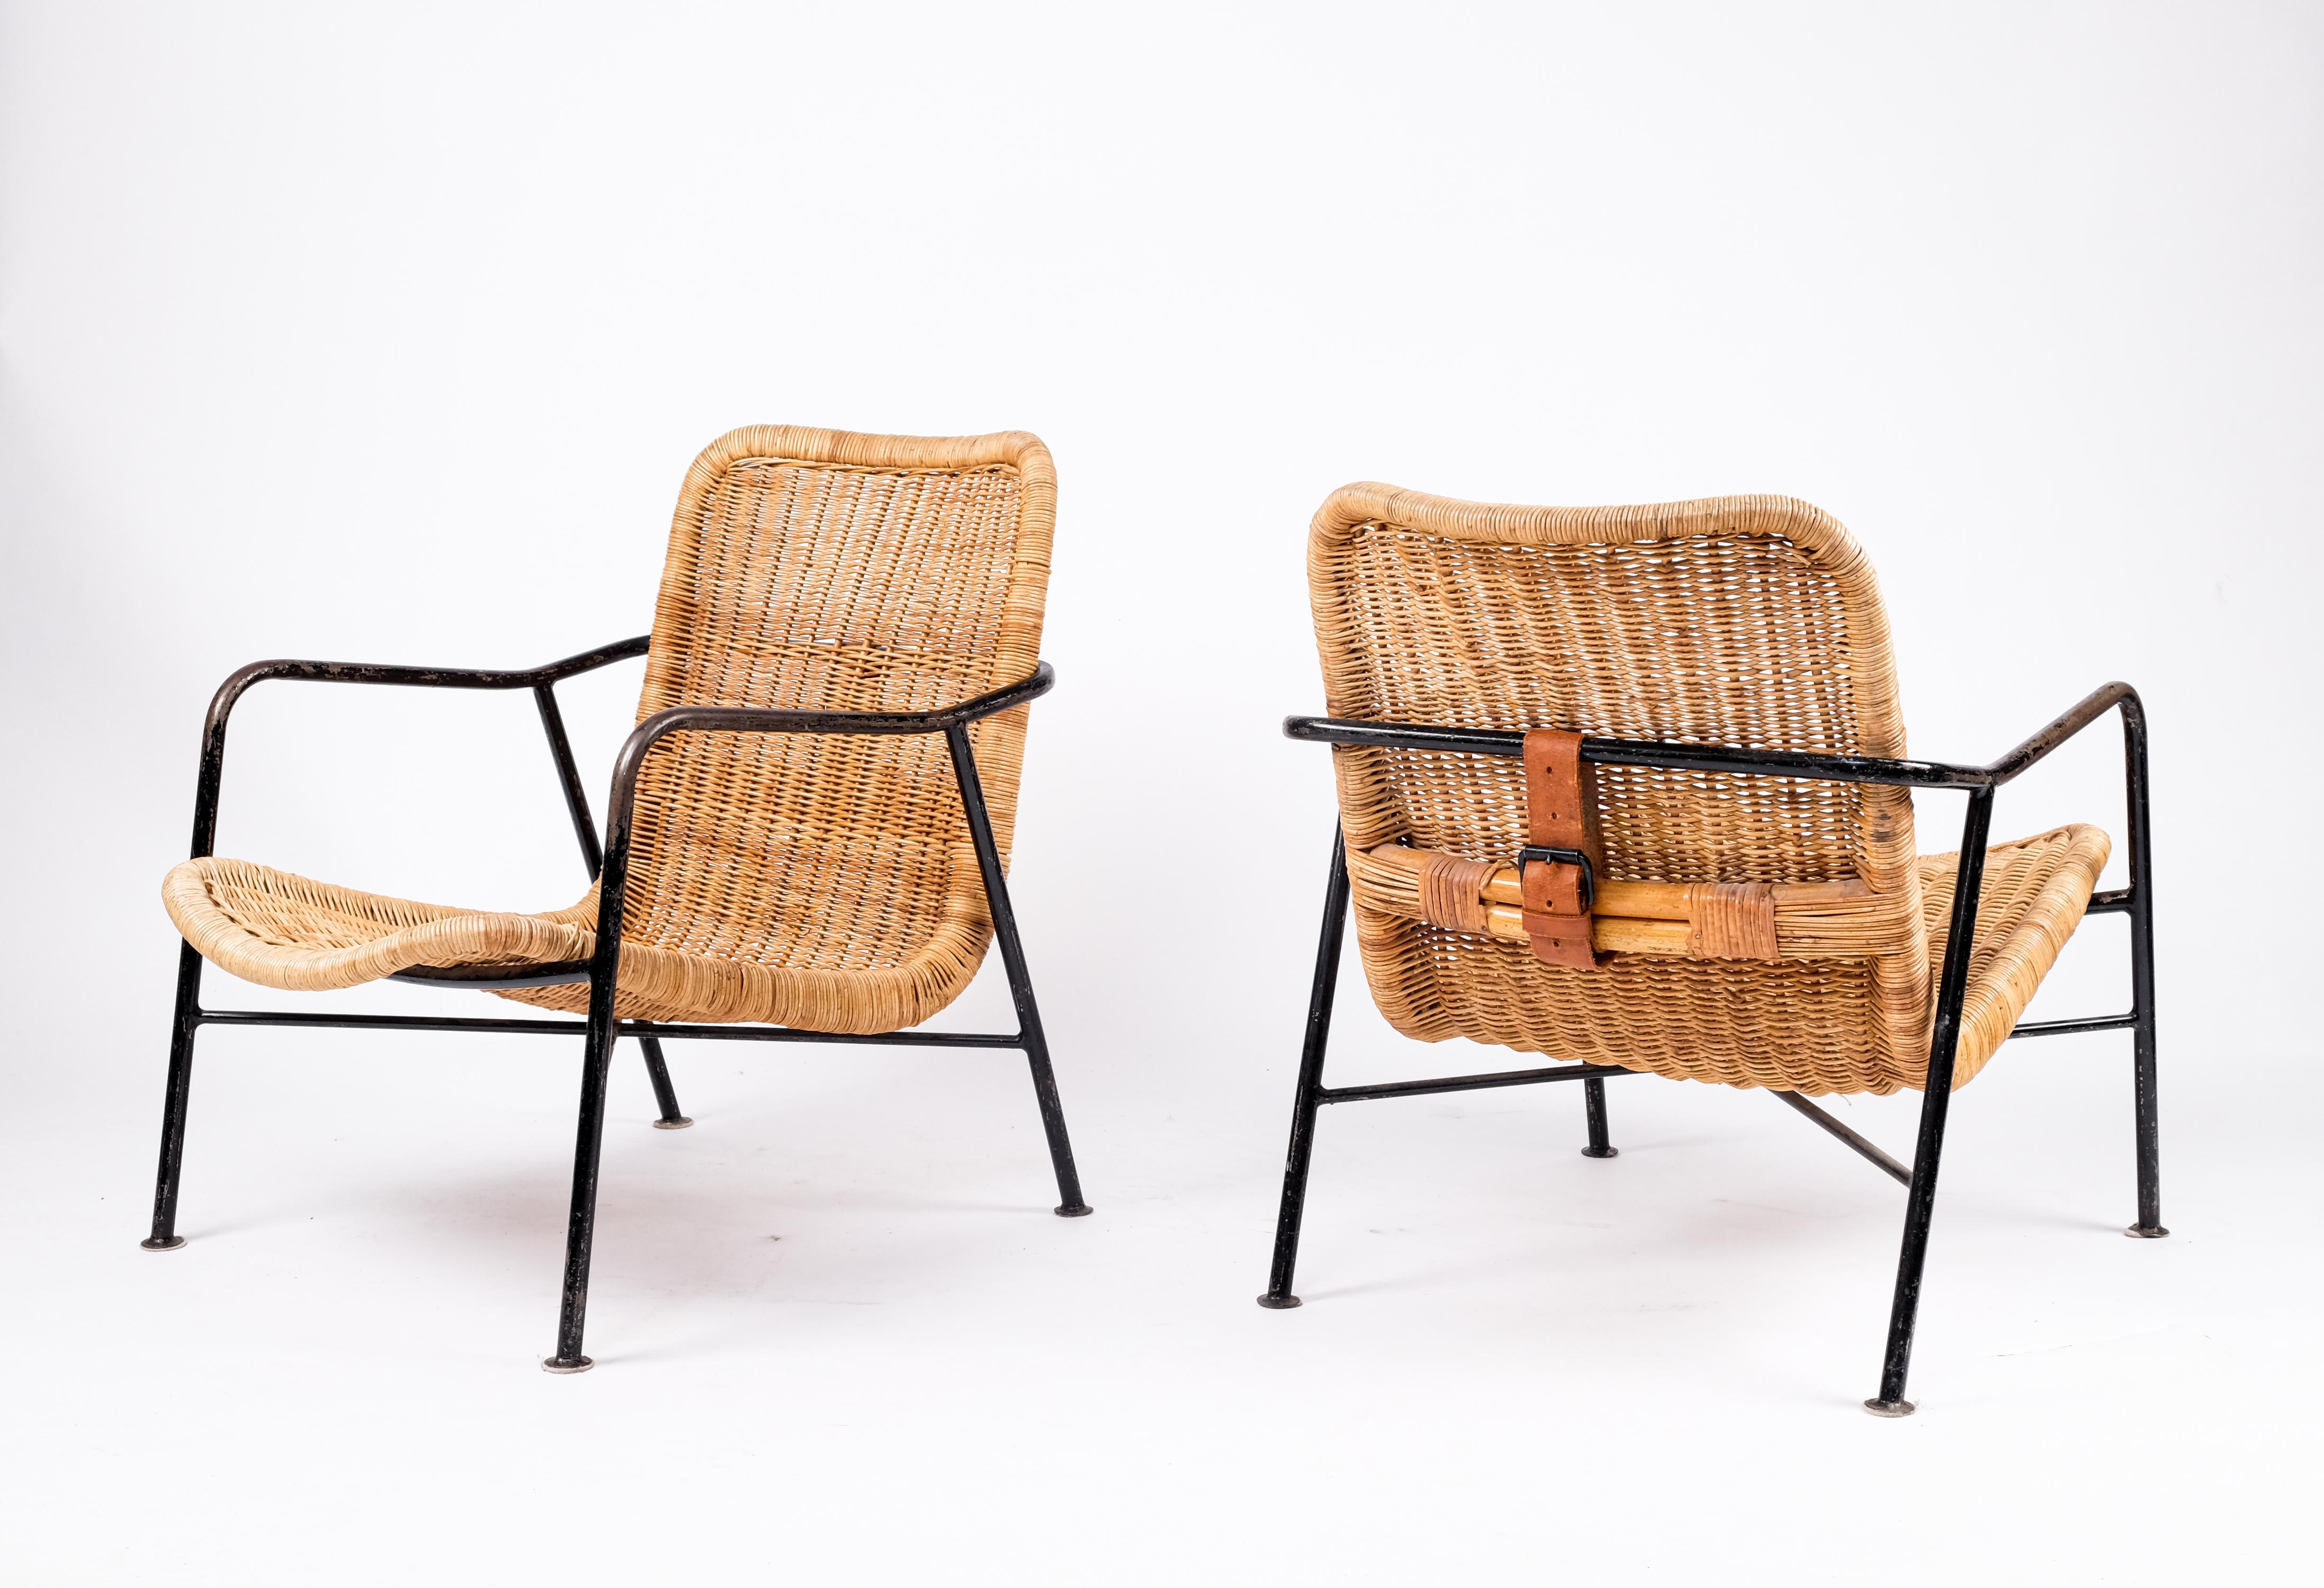 Rare Pair of Swedish Rattan Chairs, 1960s For Sale 5